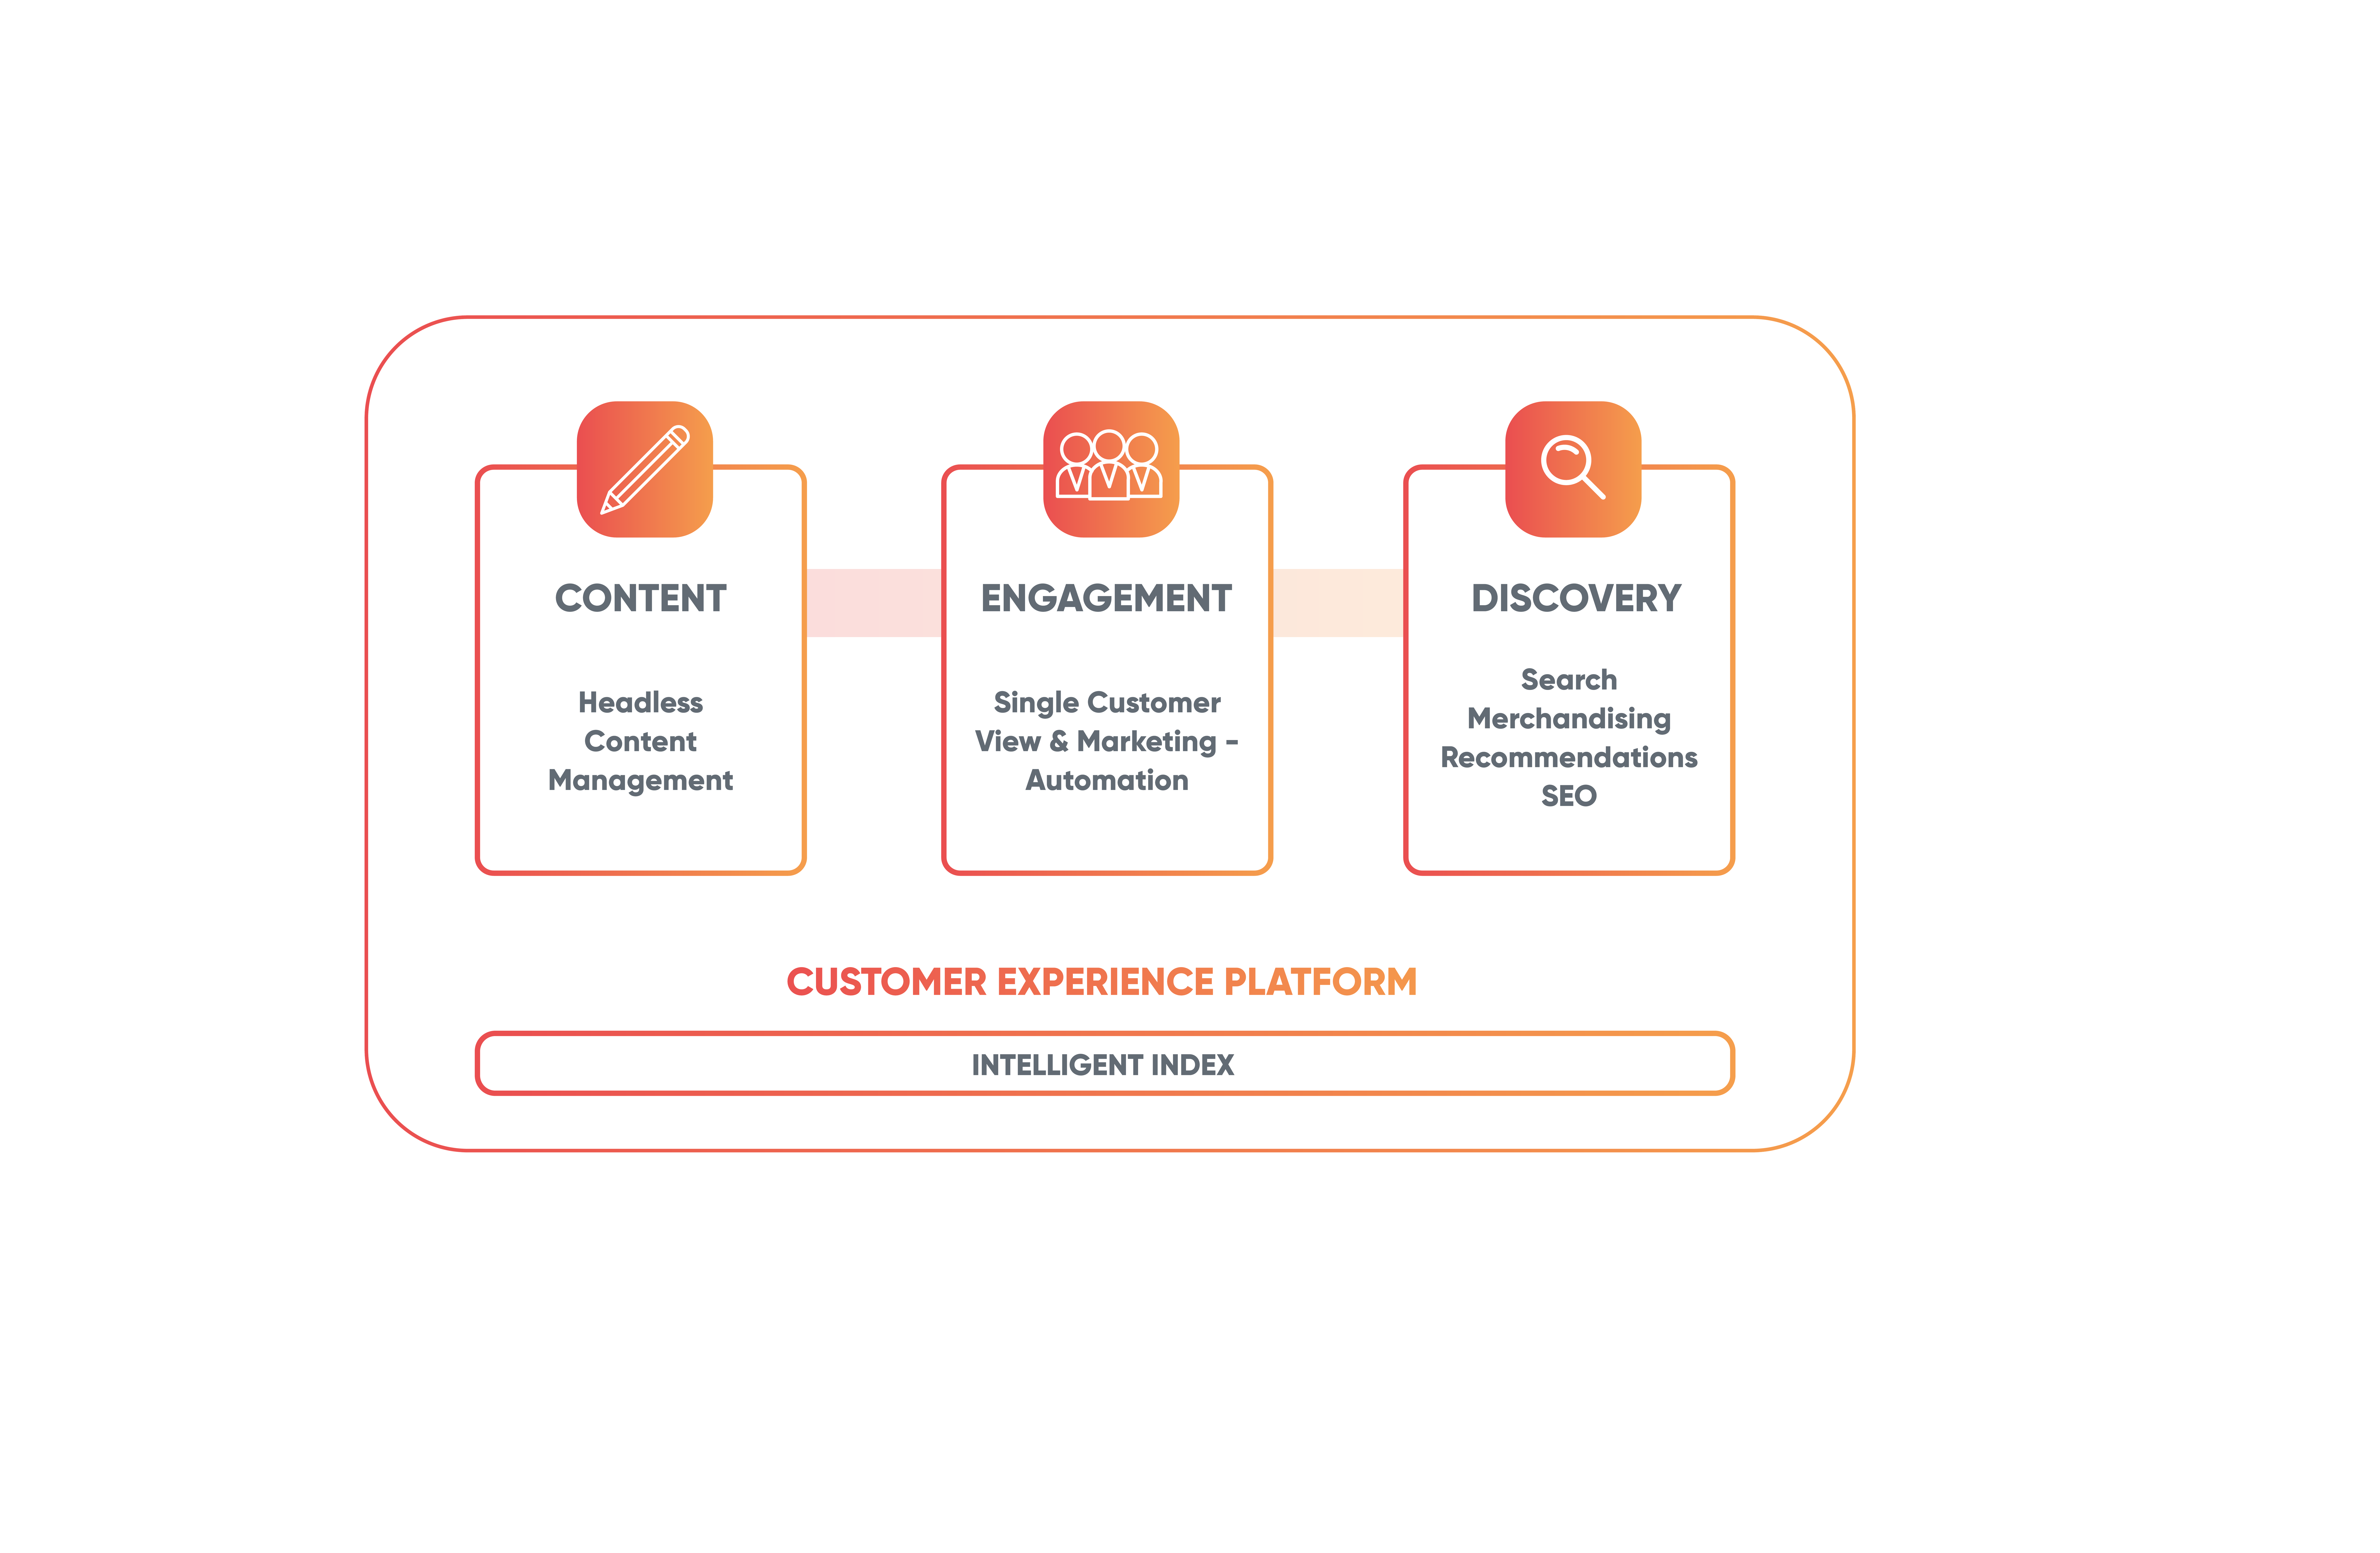 Bloomreach Value Proposition with valantic CX